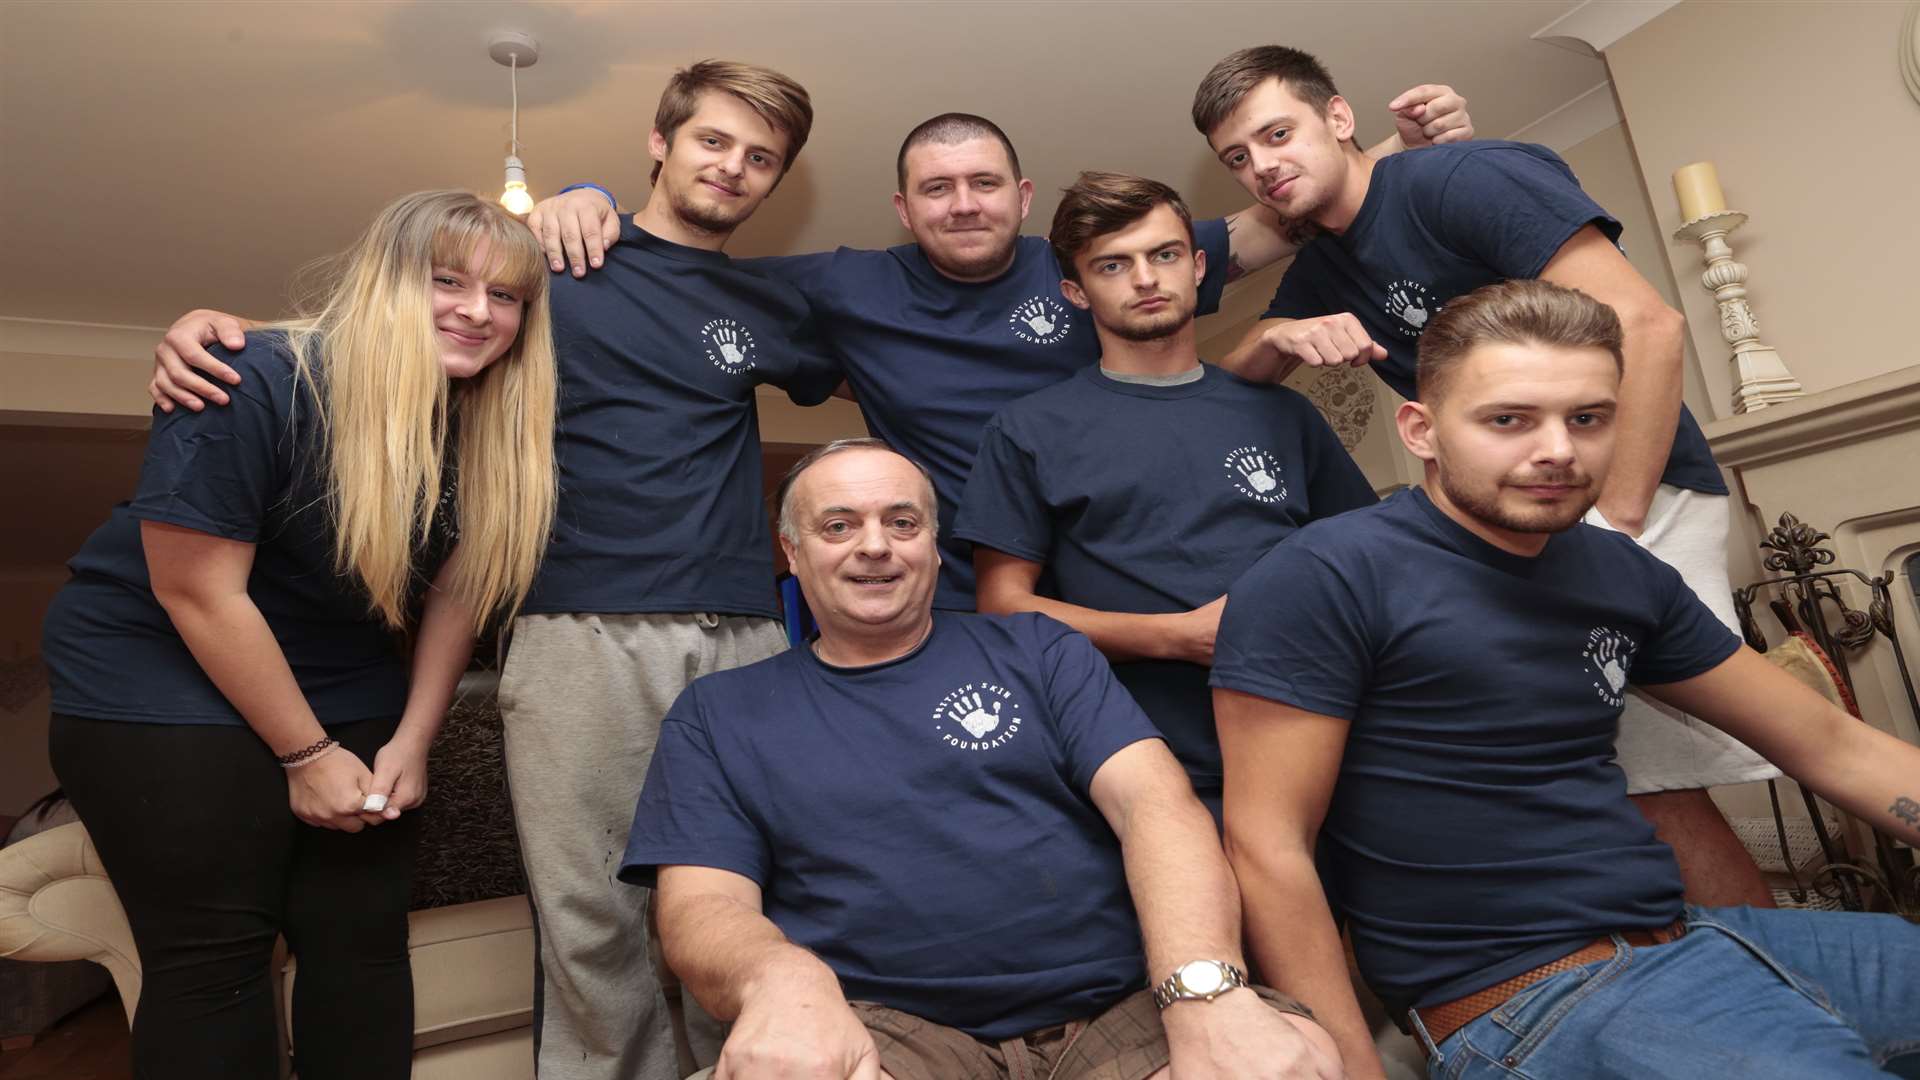 Paul Pullen and his six sons who are competing in It Takes Seven charity event